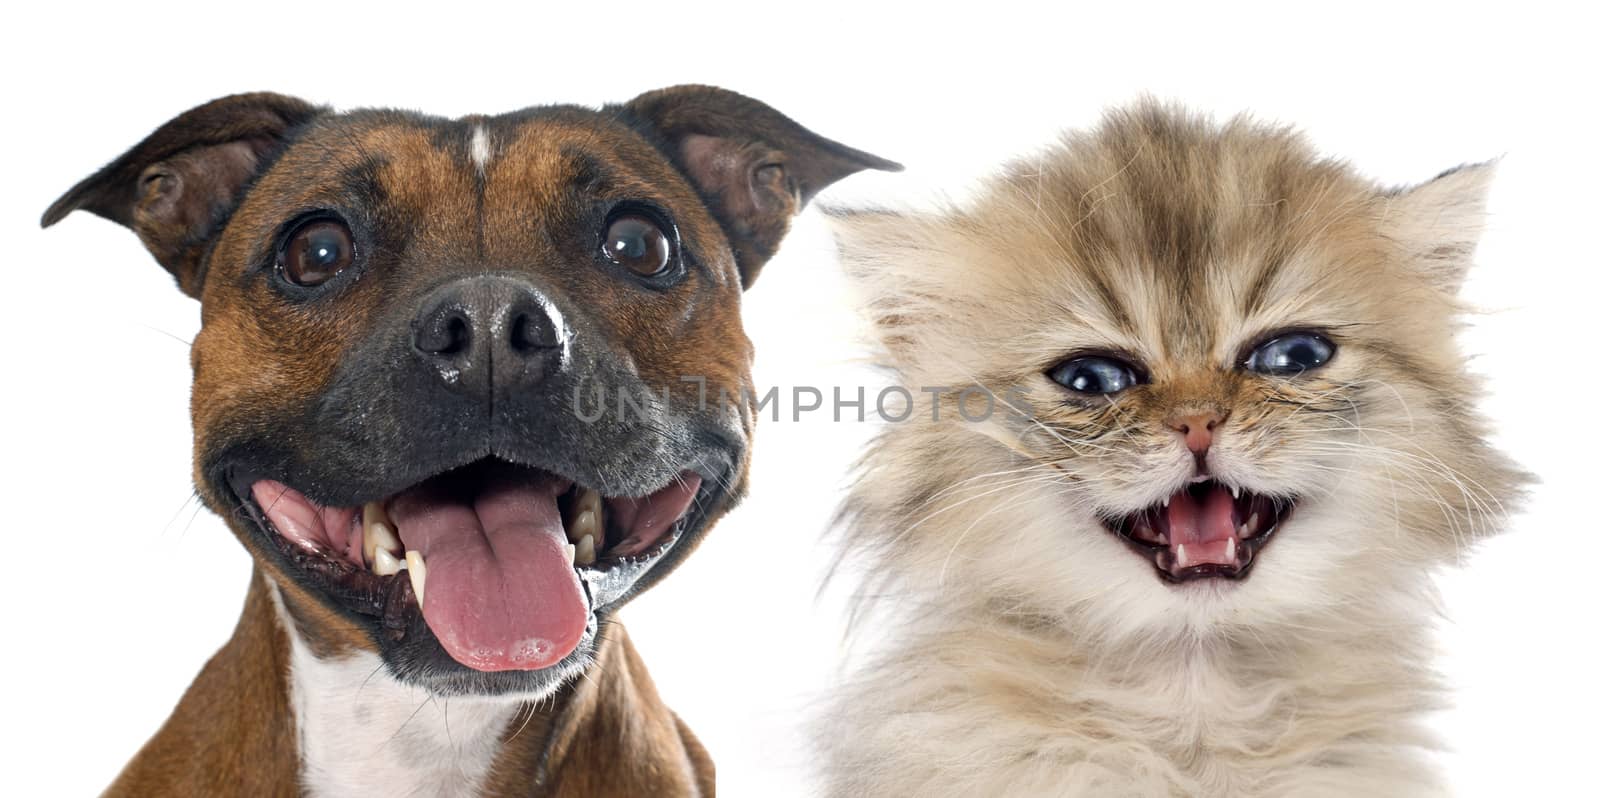 stafforshire bull terrierand persian kitten in front of white background